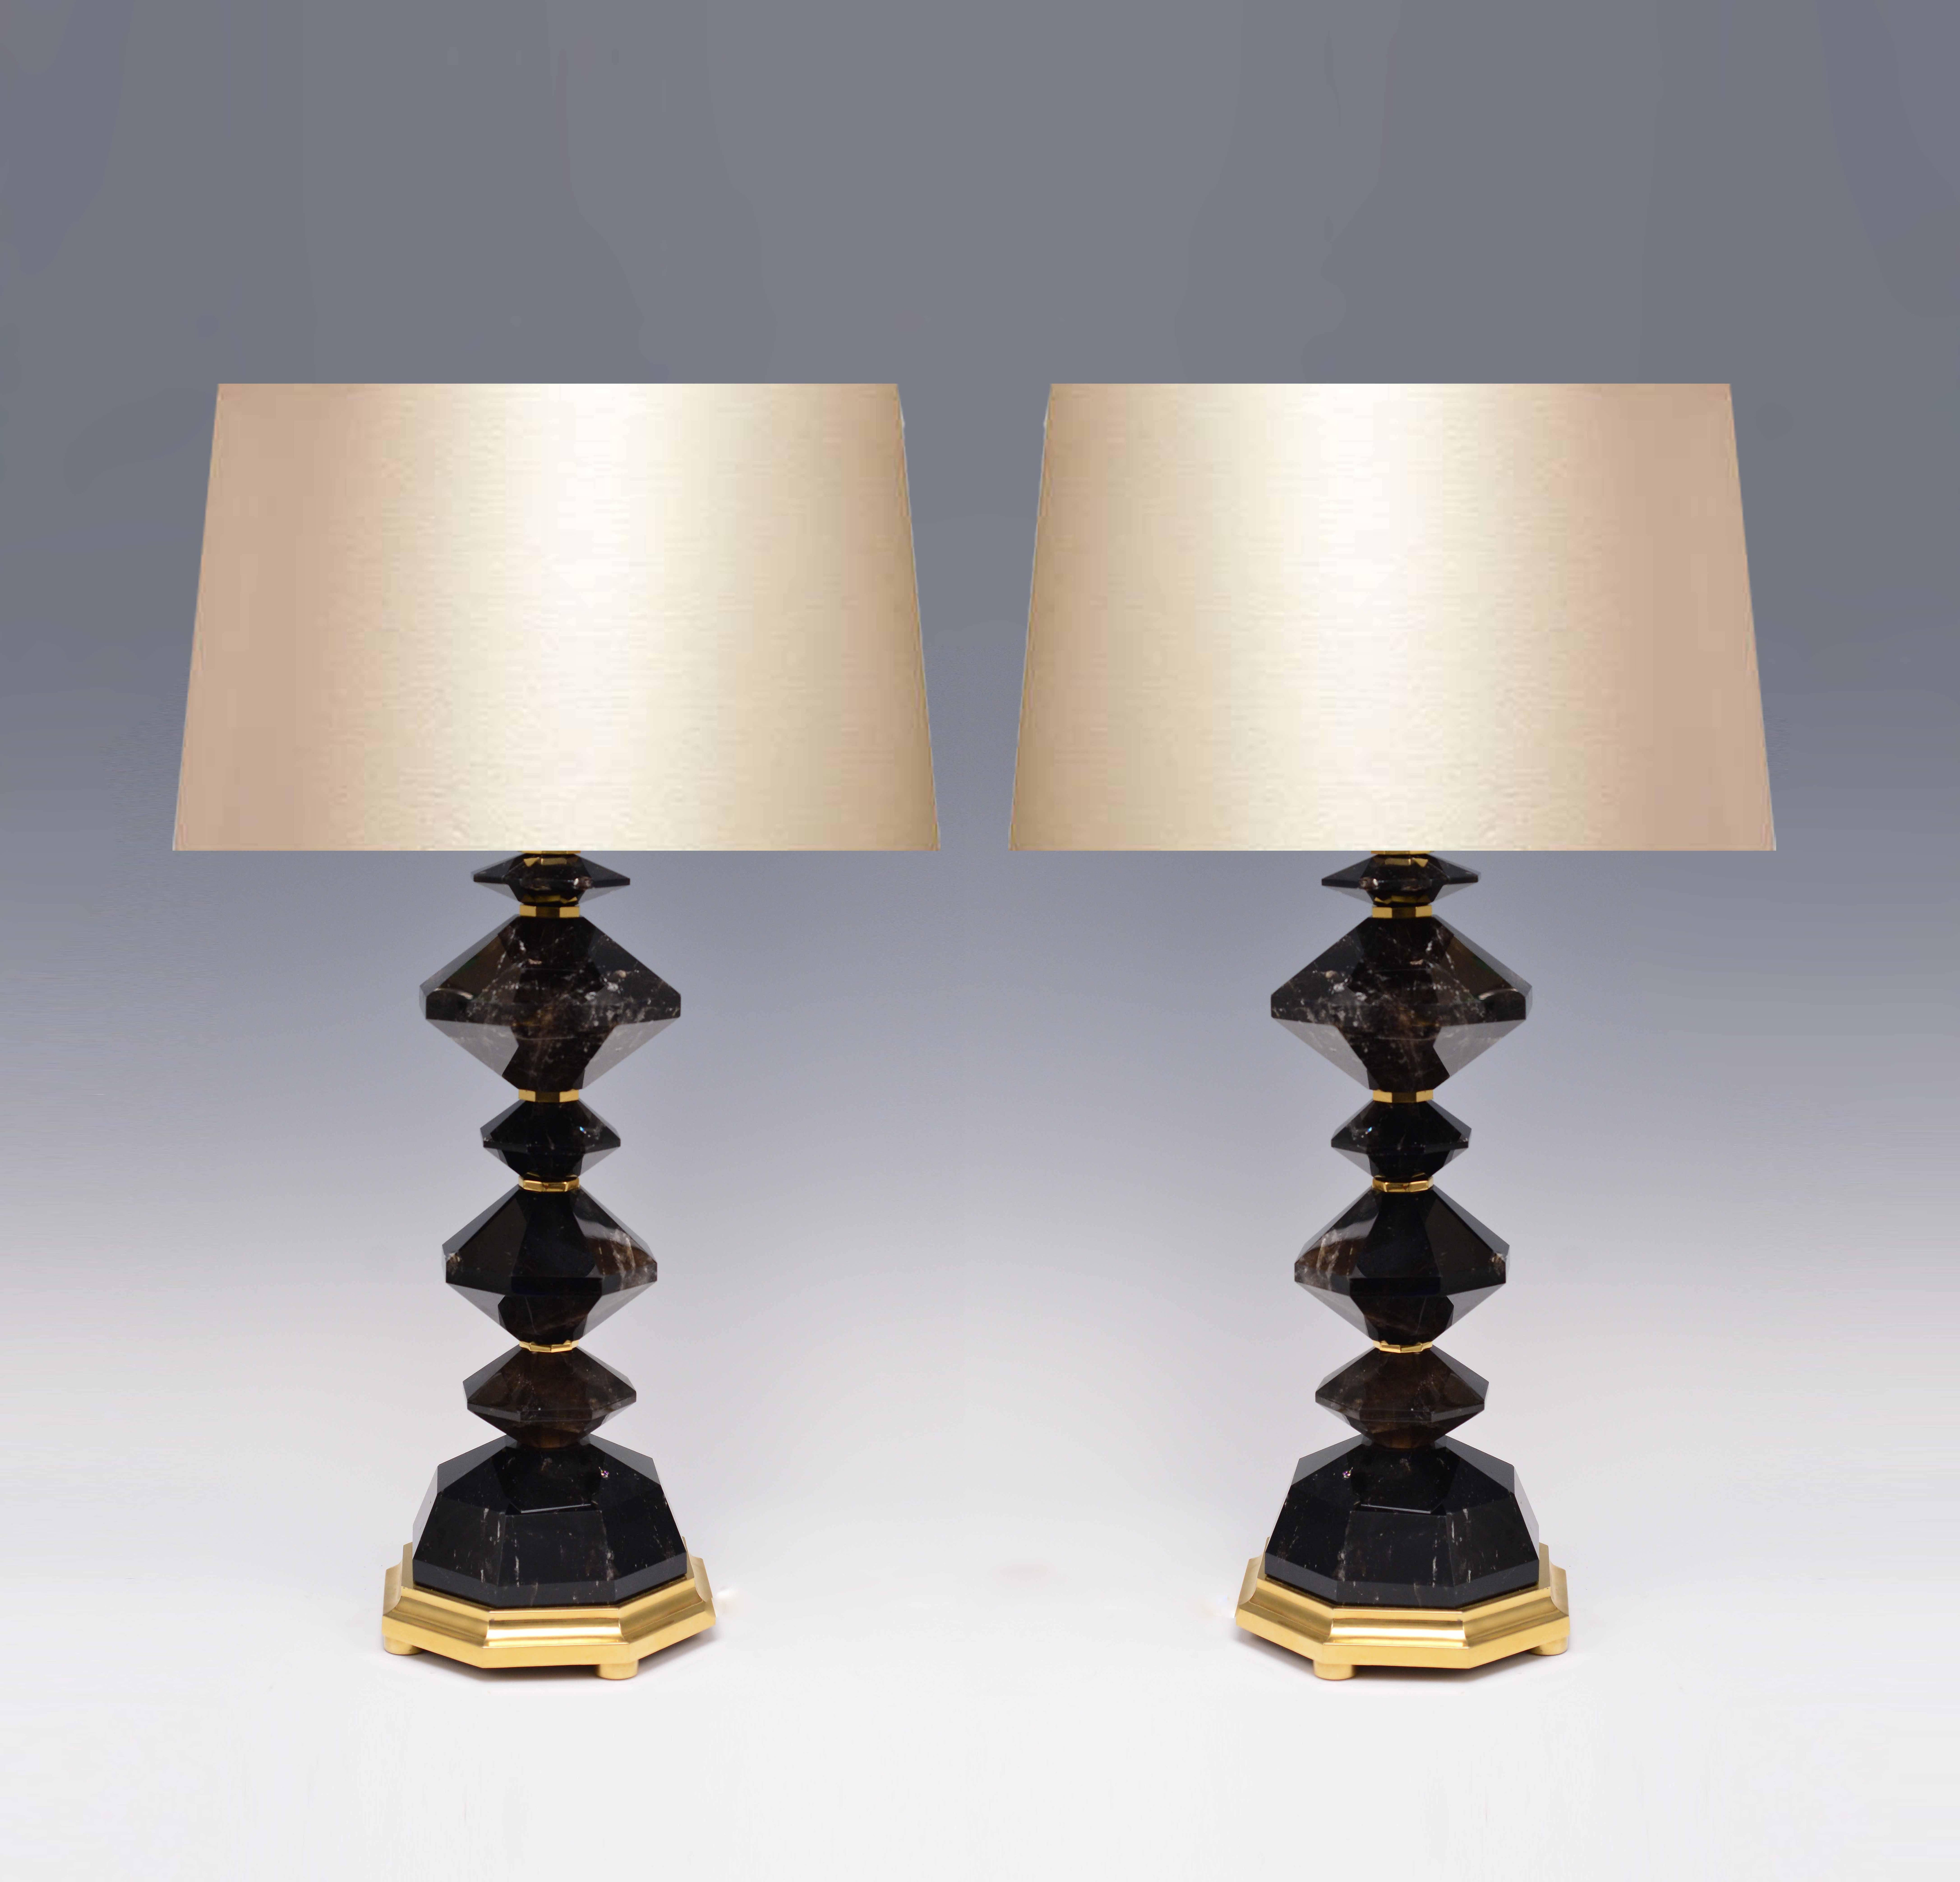 A fine carved dark diamond rock crystal lamp with polish brass parts and base, created by Phoenix Gallery, NYC.
Available in nickel plating and antique brass finished. 
To the rock crystal: 18.5 in/H.
(Lampshade not included)
